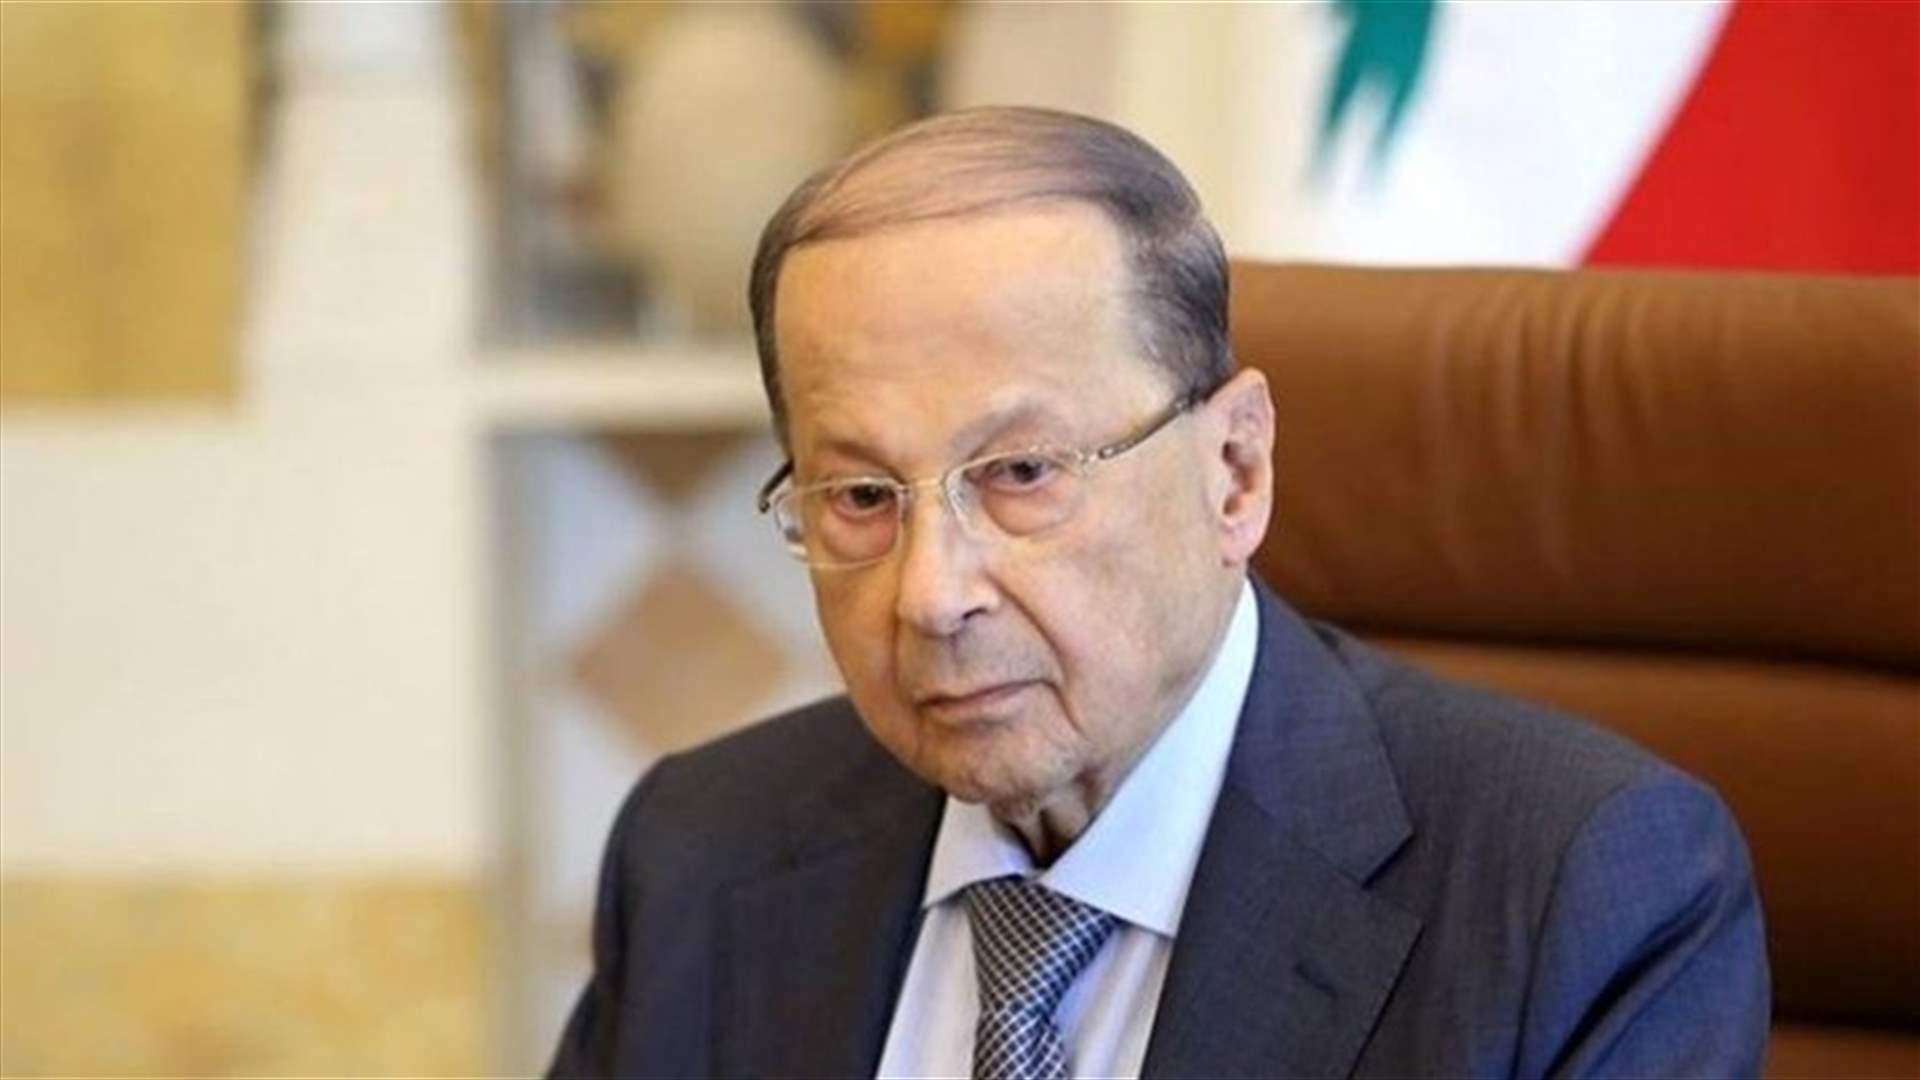 President Aoun briefed on latest situation and damages caused by the fires